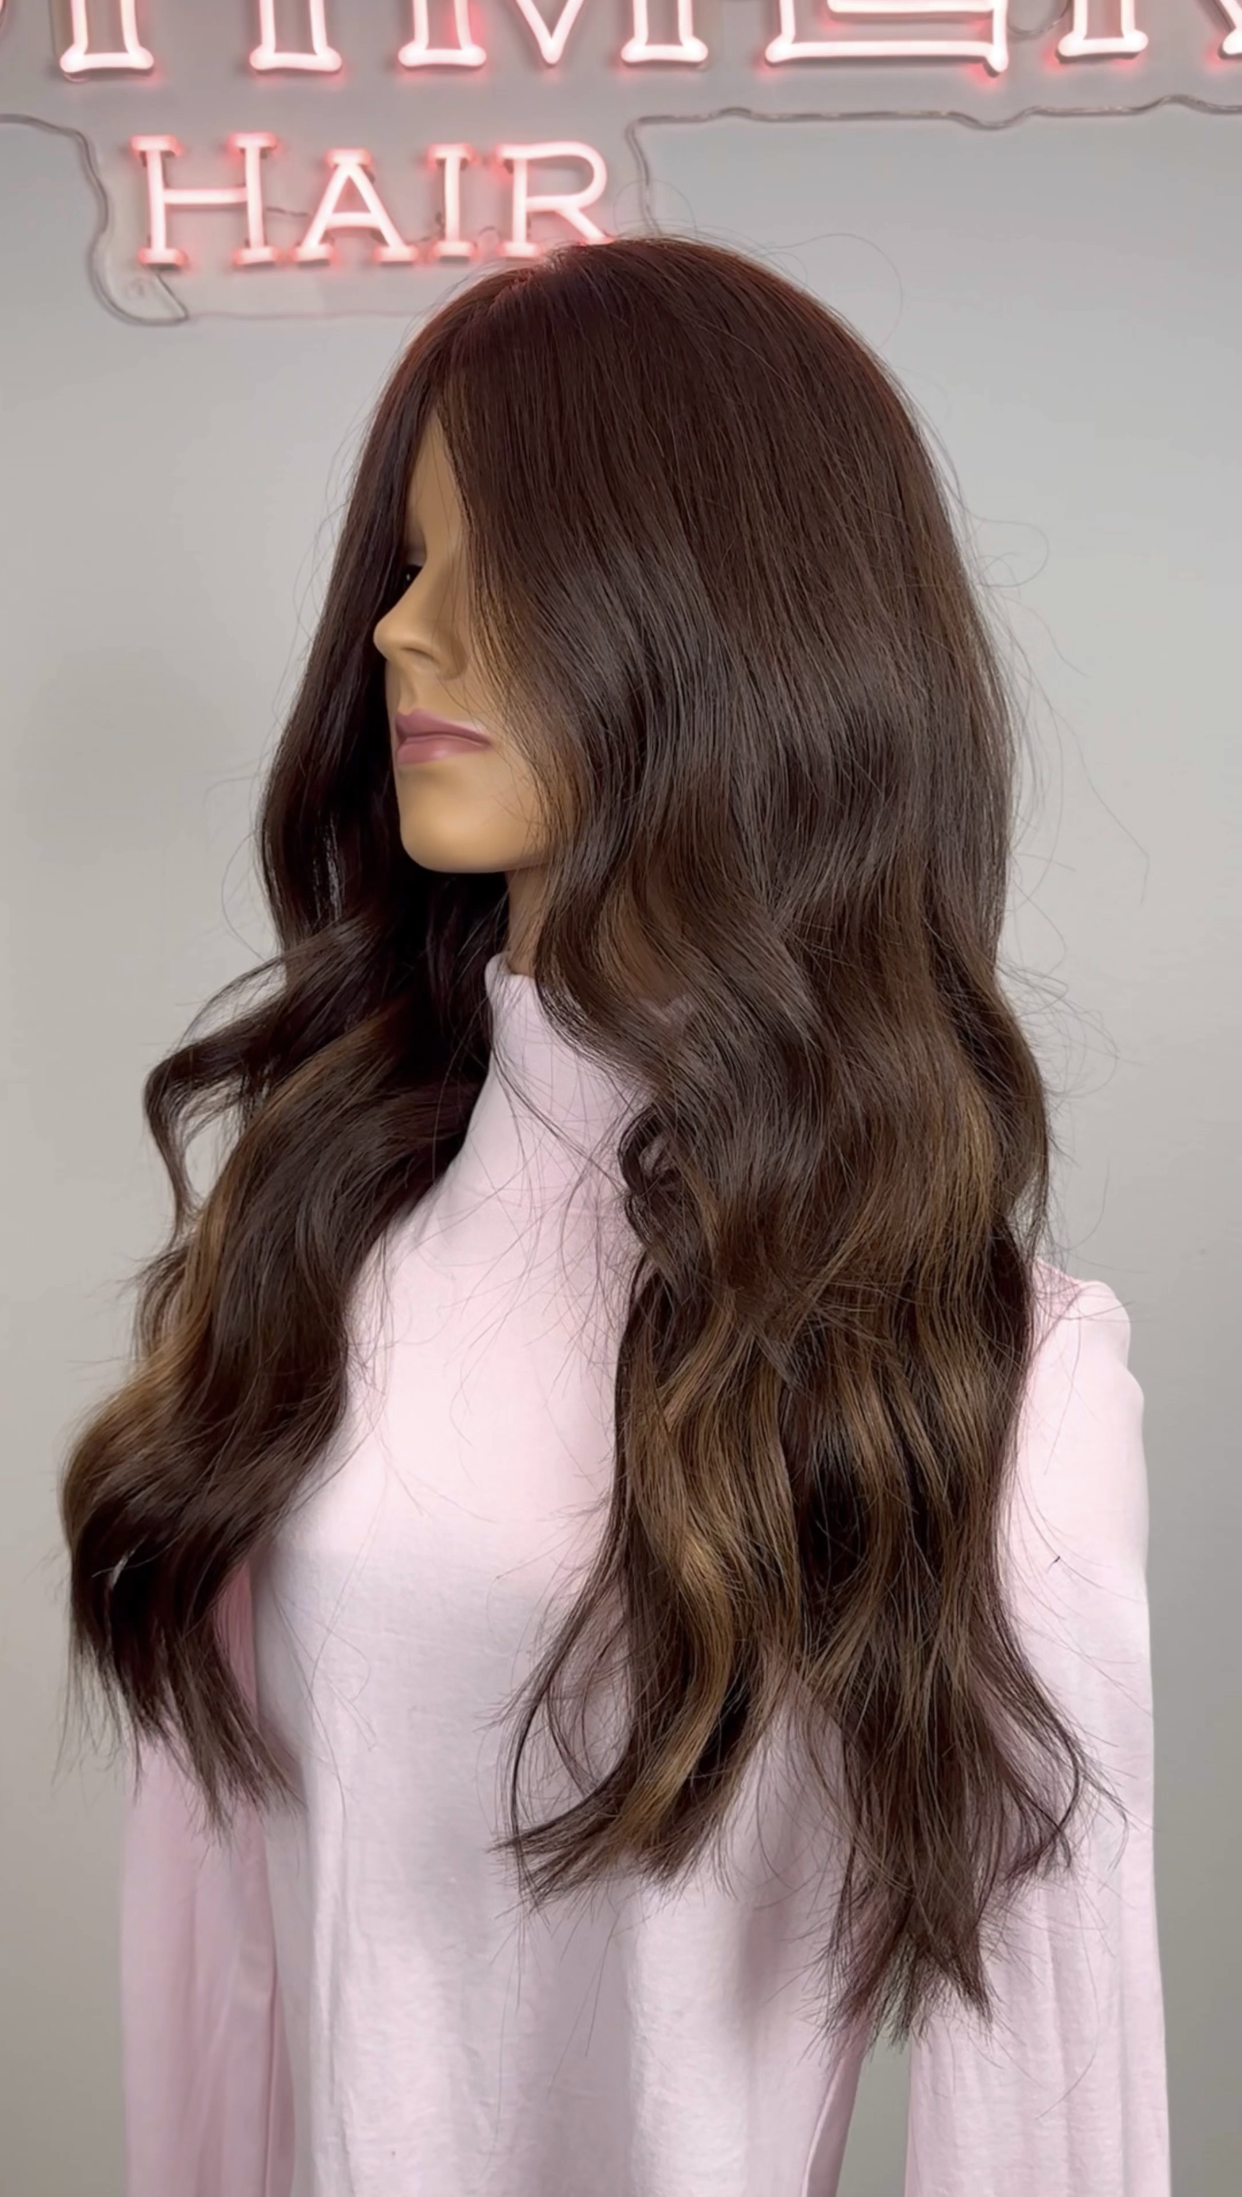 dollhead wearing a lighter shade of fill-in extensions to add highlights